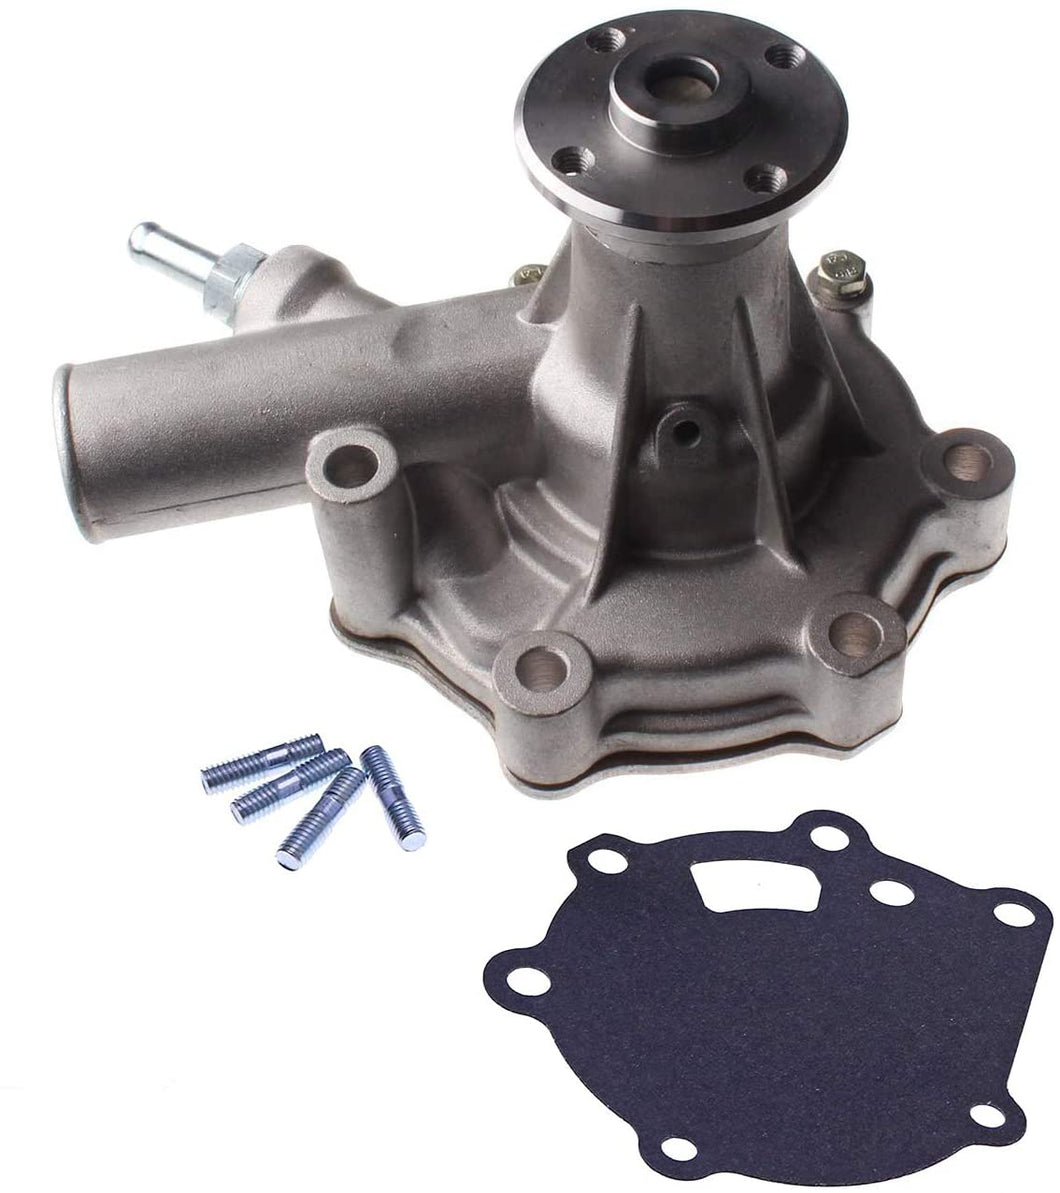 Mahindra Tractor Water Pump | MM409302 | Fits 2415, 2415H, 2015 Gear & HST, 2615 Gear & HST